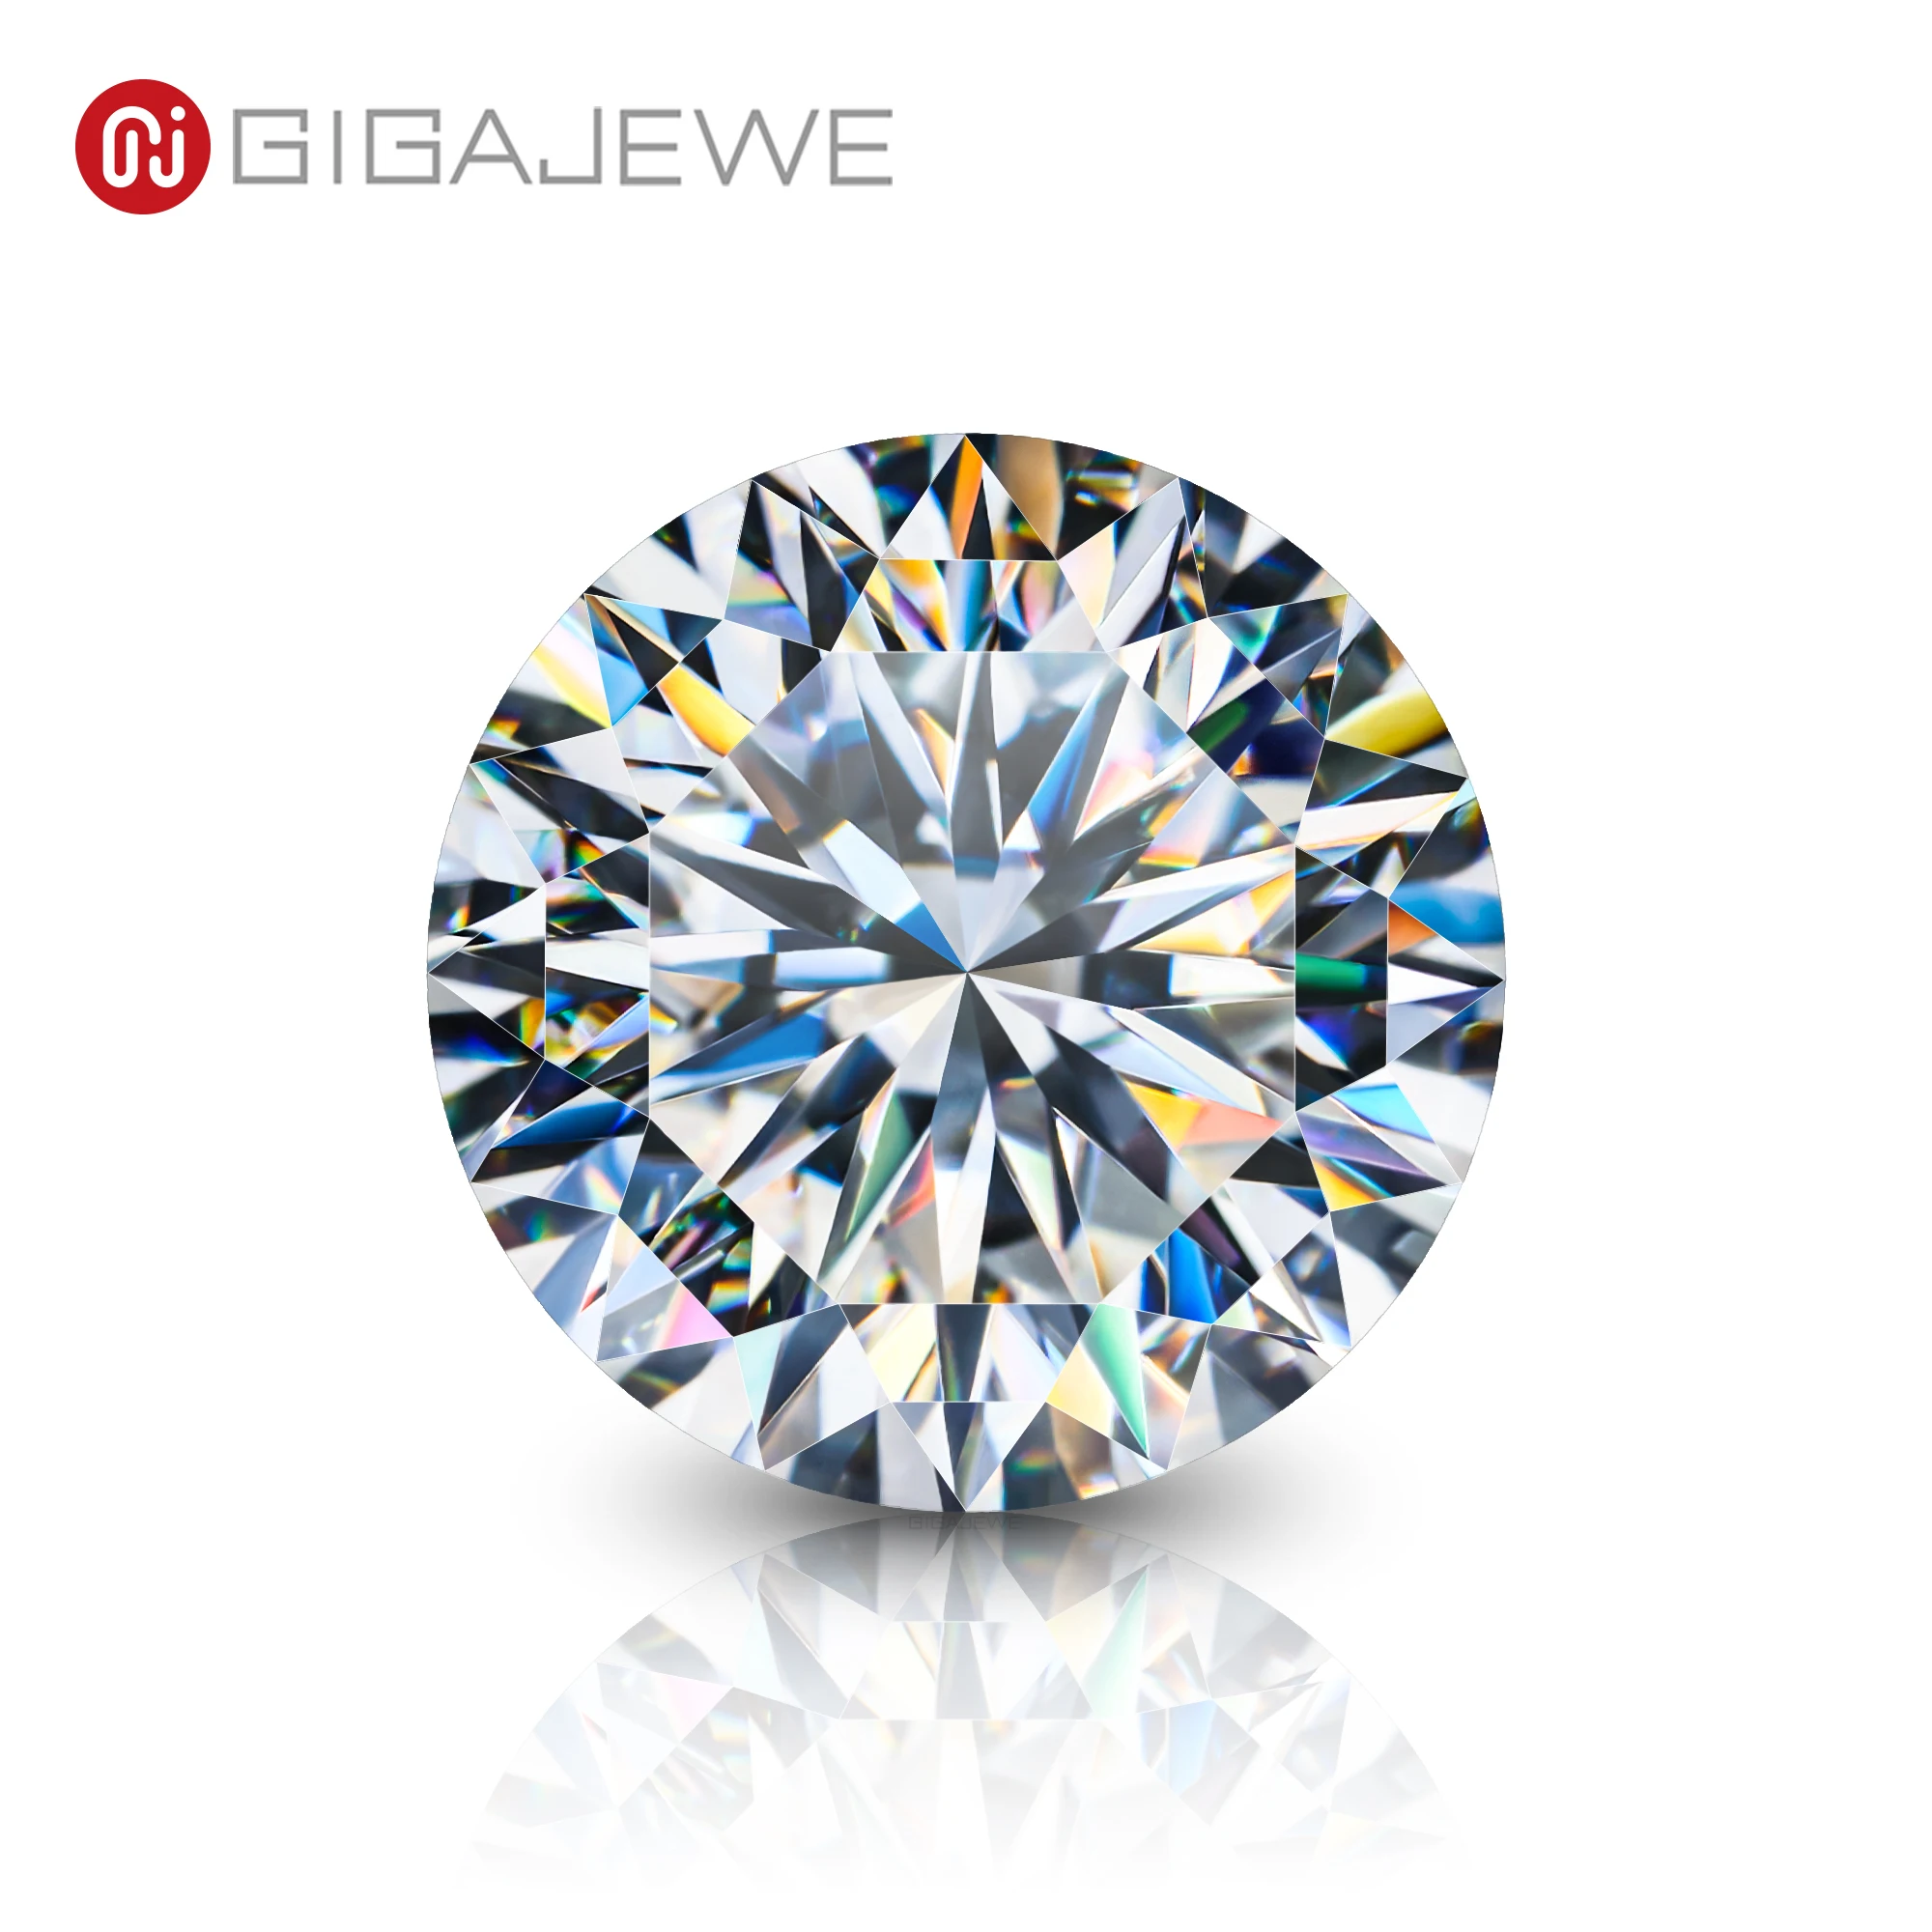 

GIGAJEWE Round cut moissanite White D color VVS1 With GRA Certificate 16 Hearts and Arrows Cut synthetic gemstone